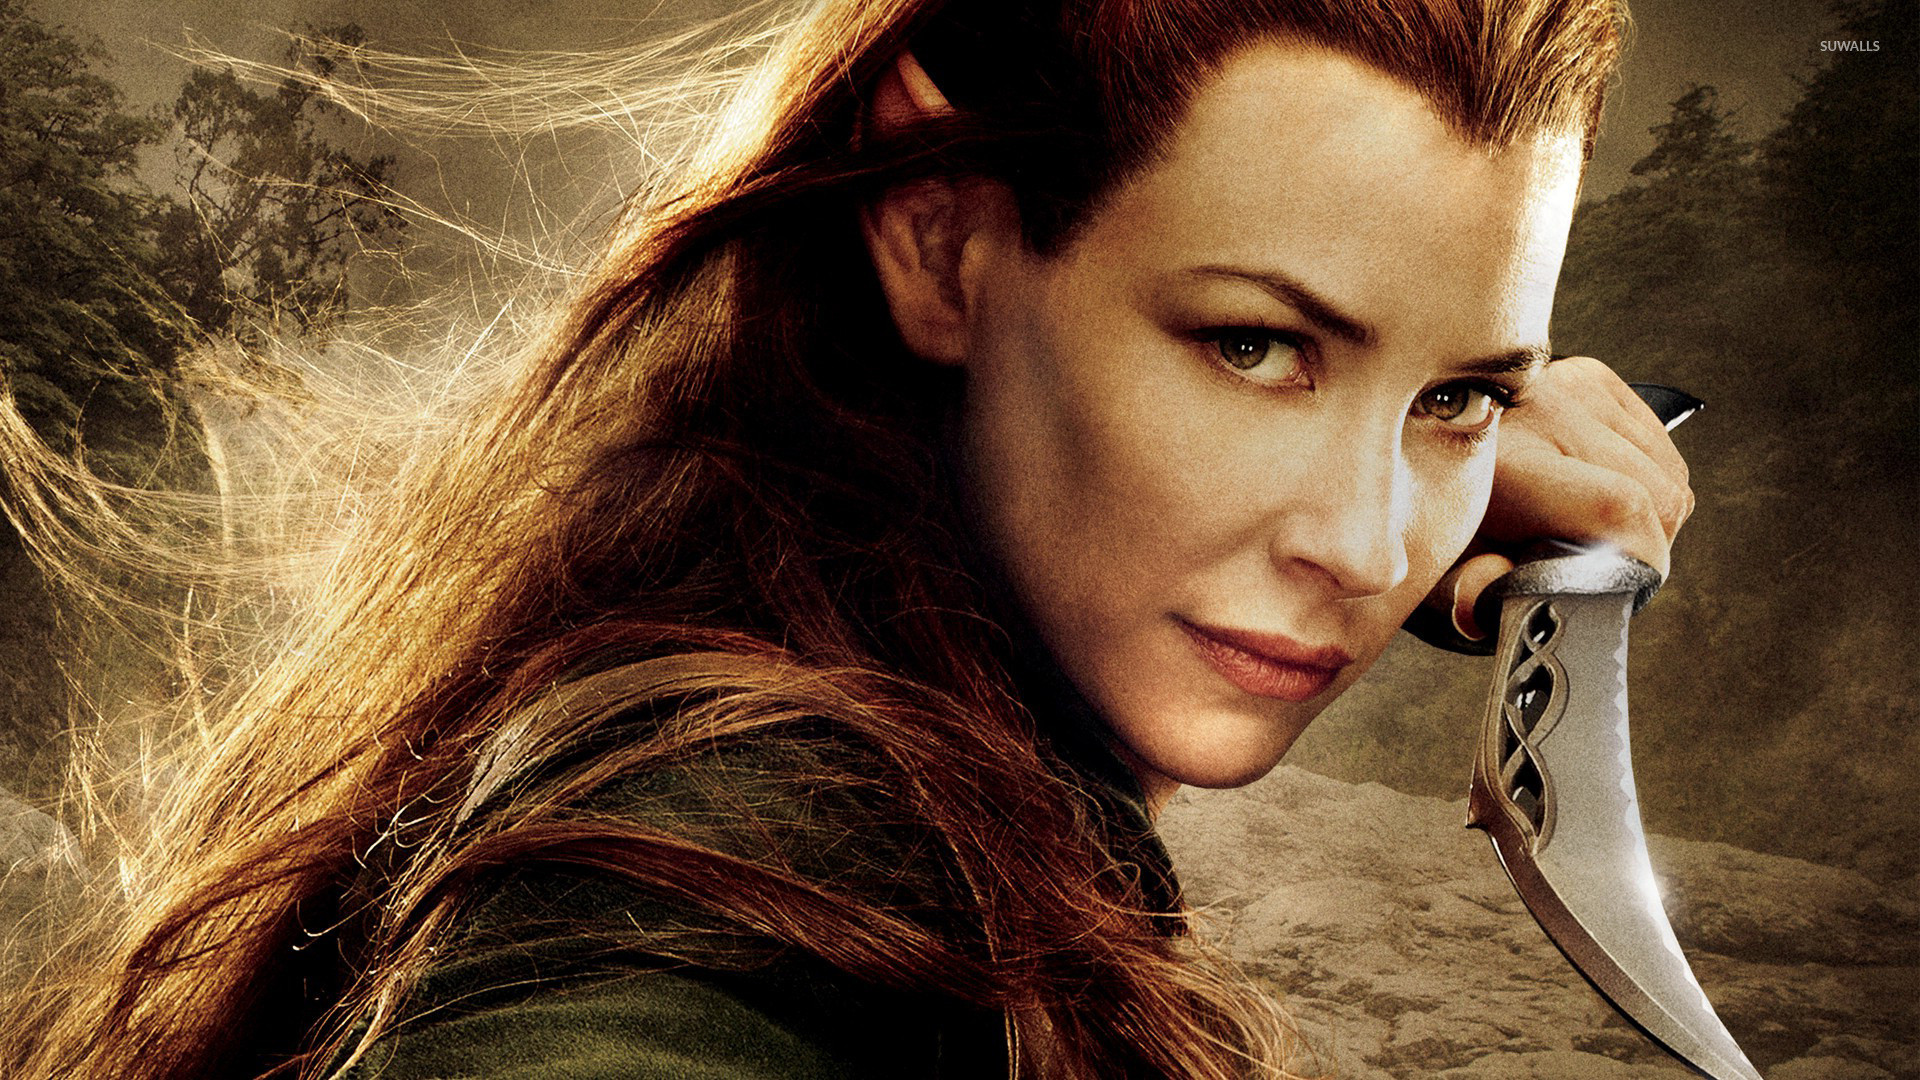 Tauriel – The Hobbit The Desolation of Smaug wallpaper jpg